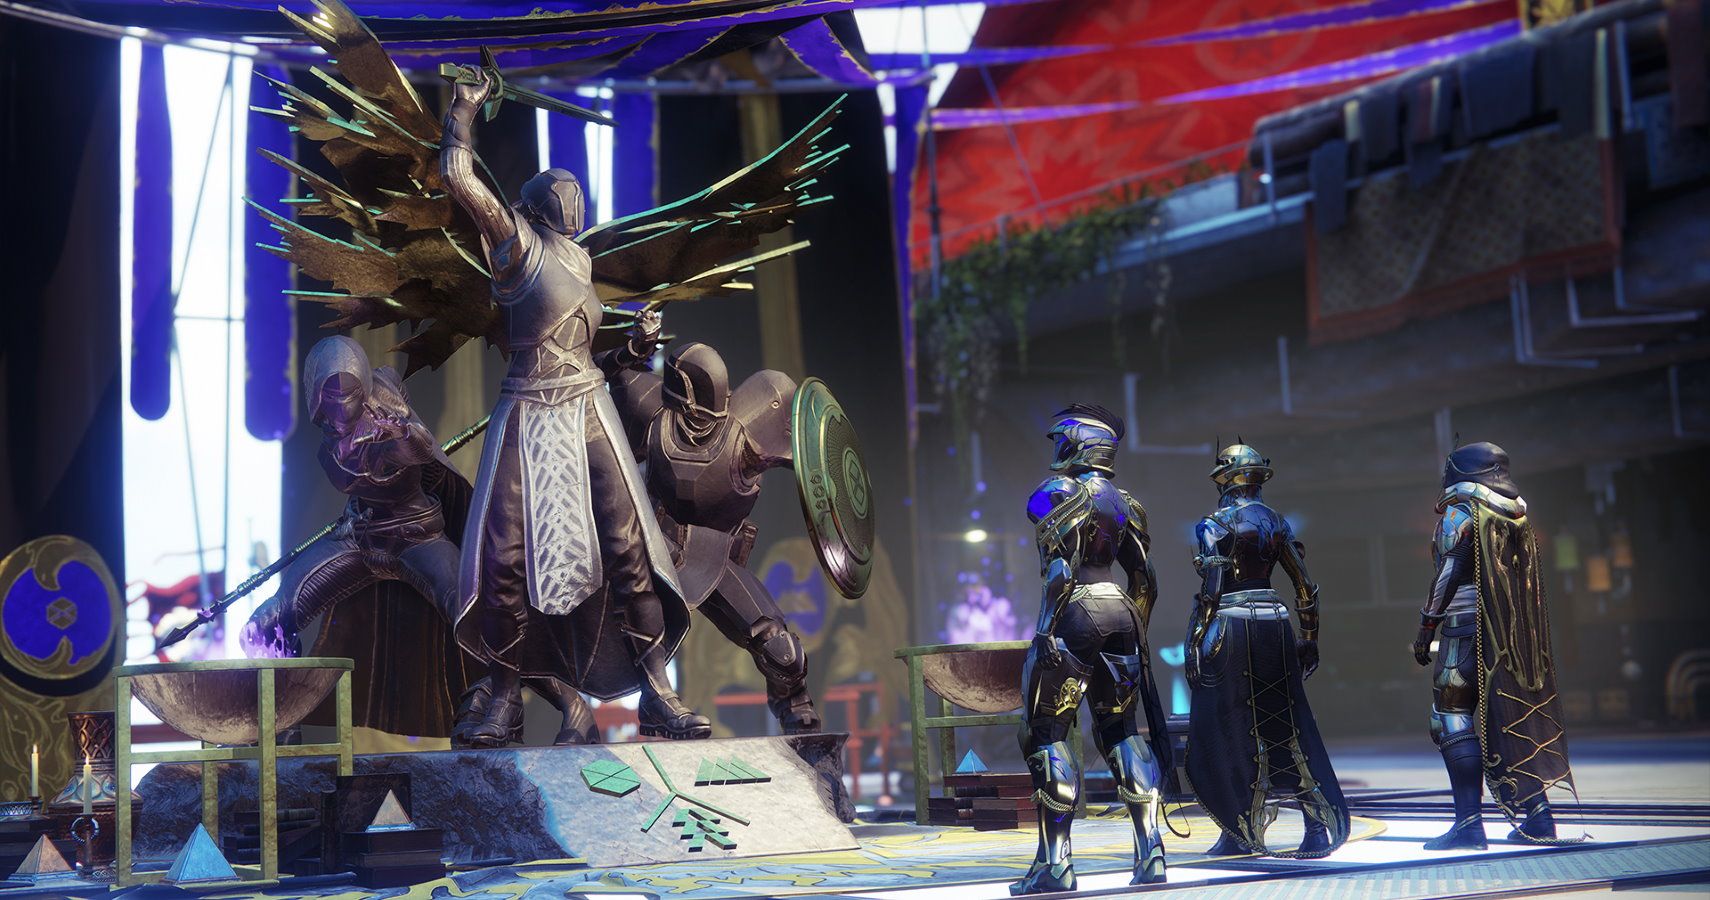 A Complete Guide To This Year's Solstice Of Heroes In Destiny 2